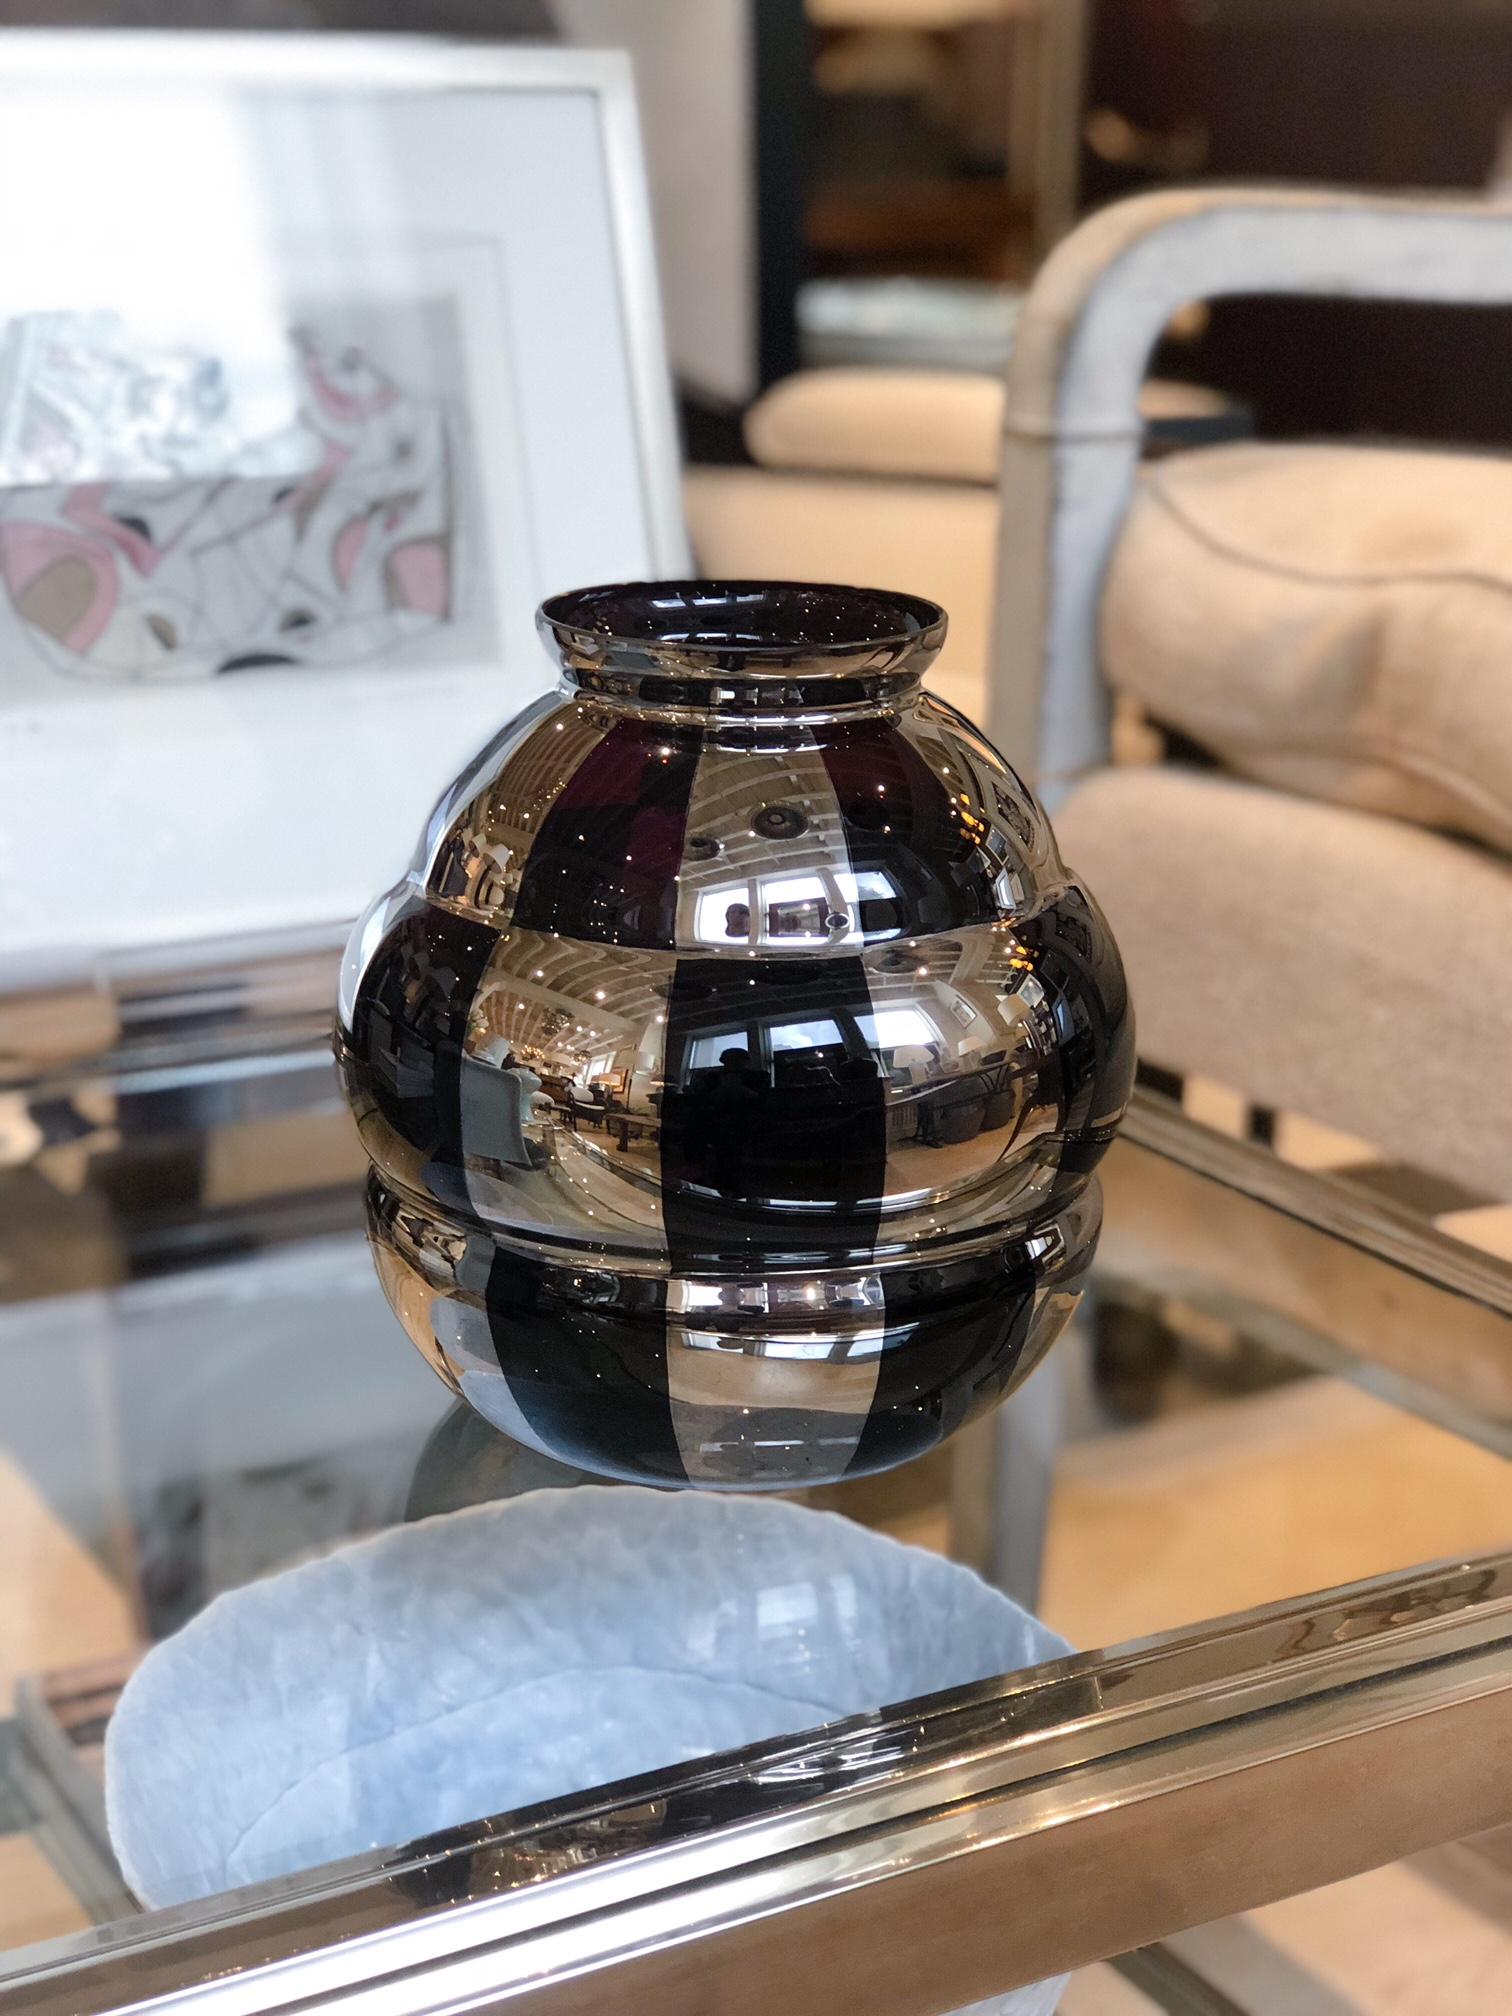 French Art Deco amethyst glass vase with silver, checkered overlay. Signed on bottom, Fanus. France, circa 1930s.

Size: 8” diameter 9” height

In excellent condition - no chips, cracks or loss of silver overlay.

Available to see in our NYC